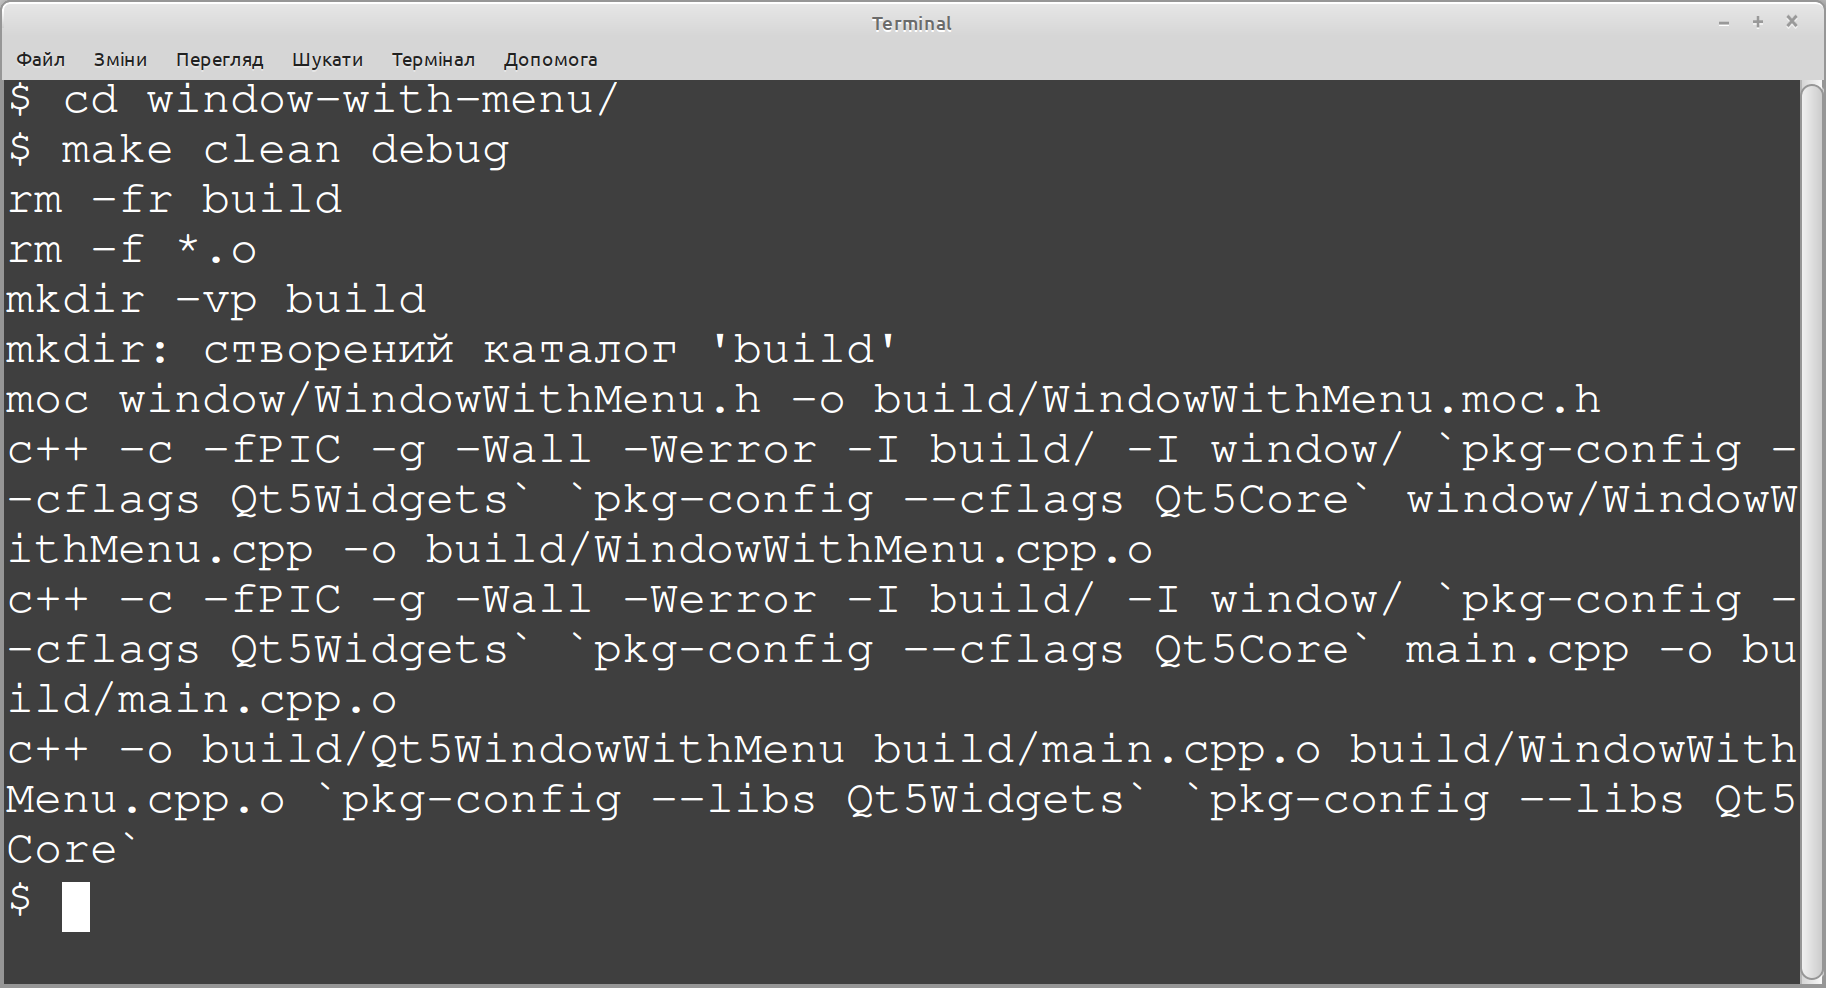 /resources/uploads/img/Qt-intro-building-window-with-menu-with-help-of-Makefile-output-example.png